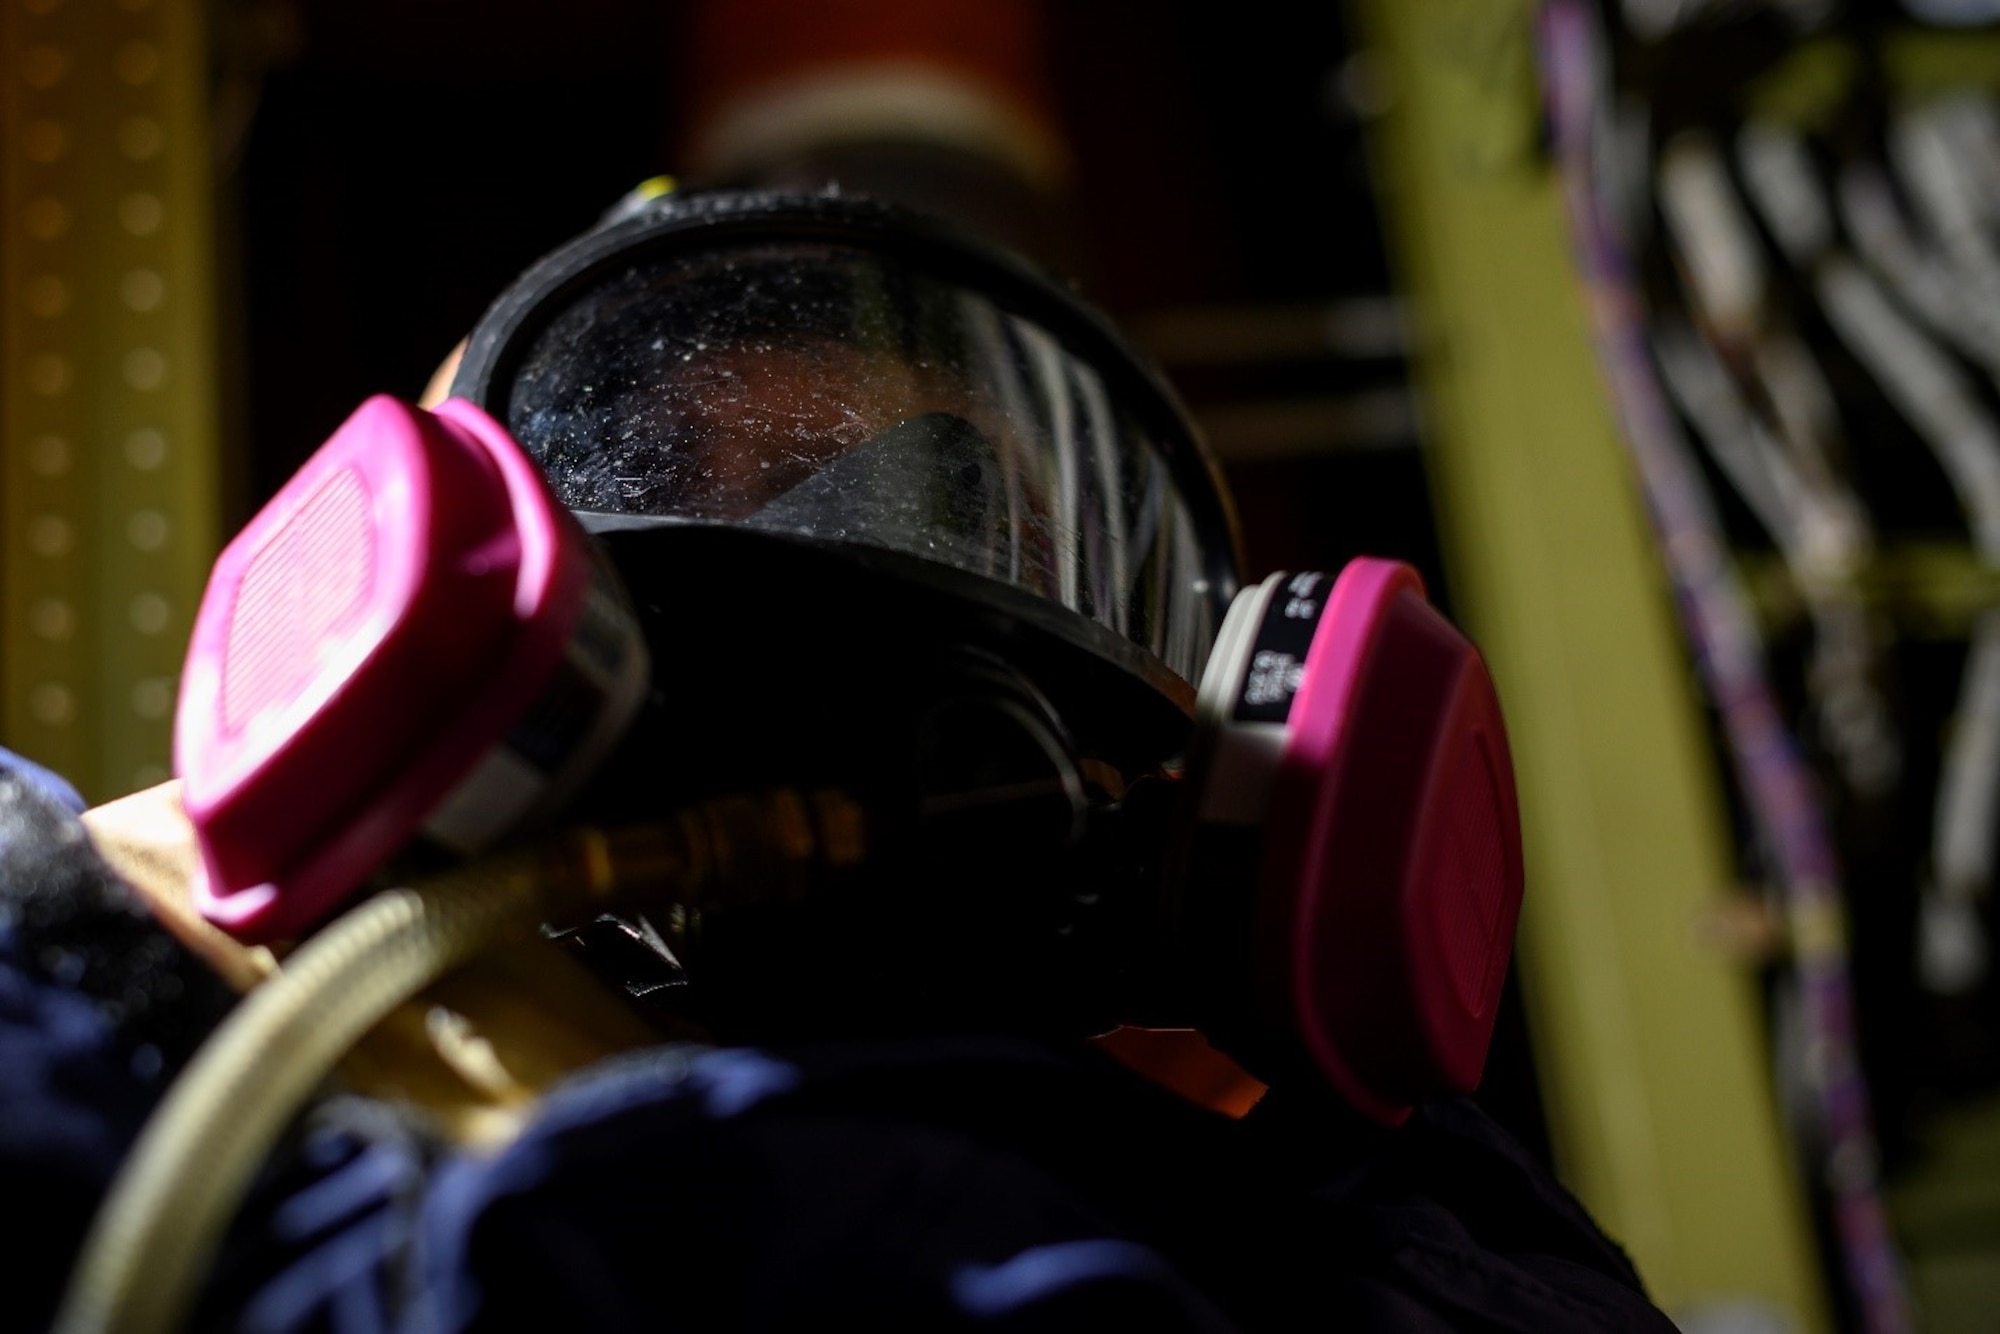 A training dummy in a respirator sits in a compartment of an aircraft